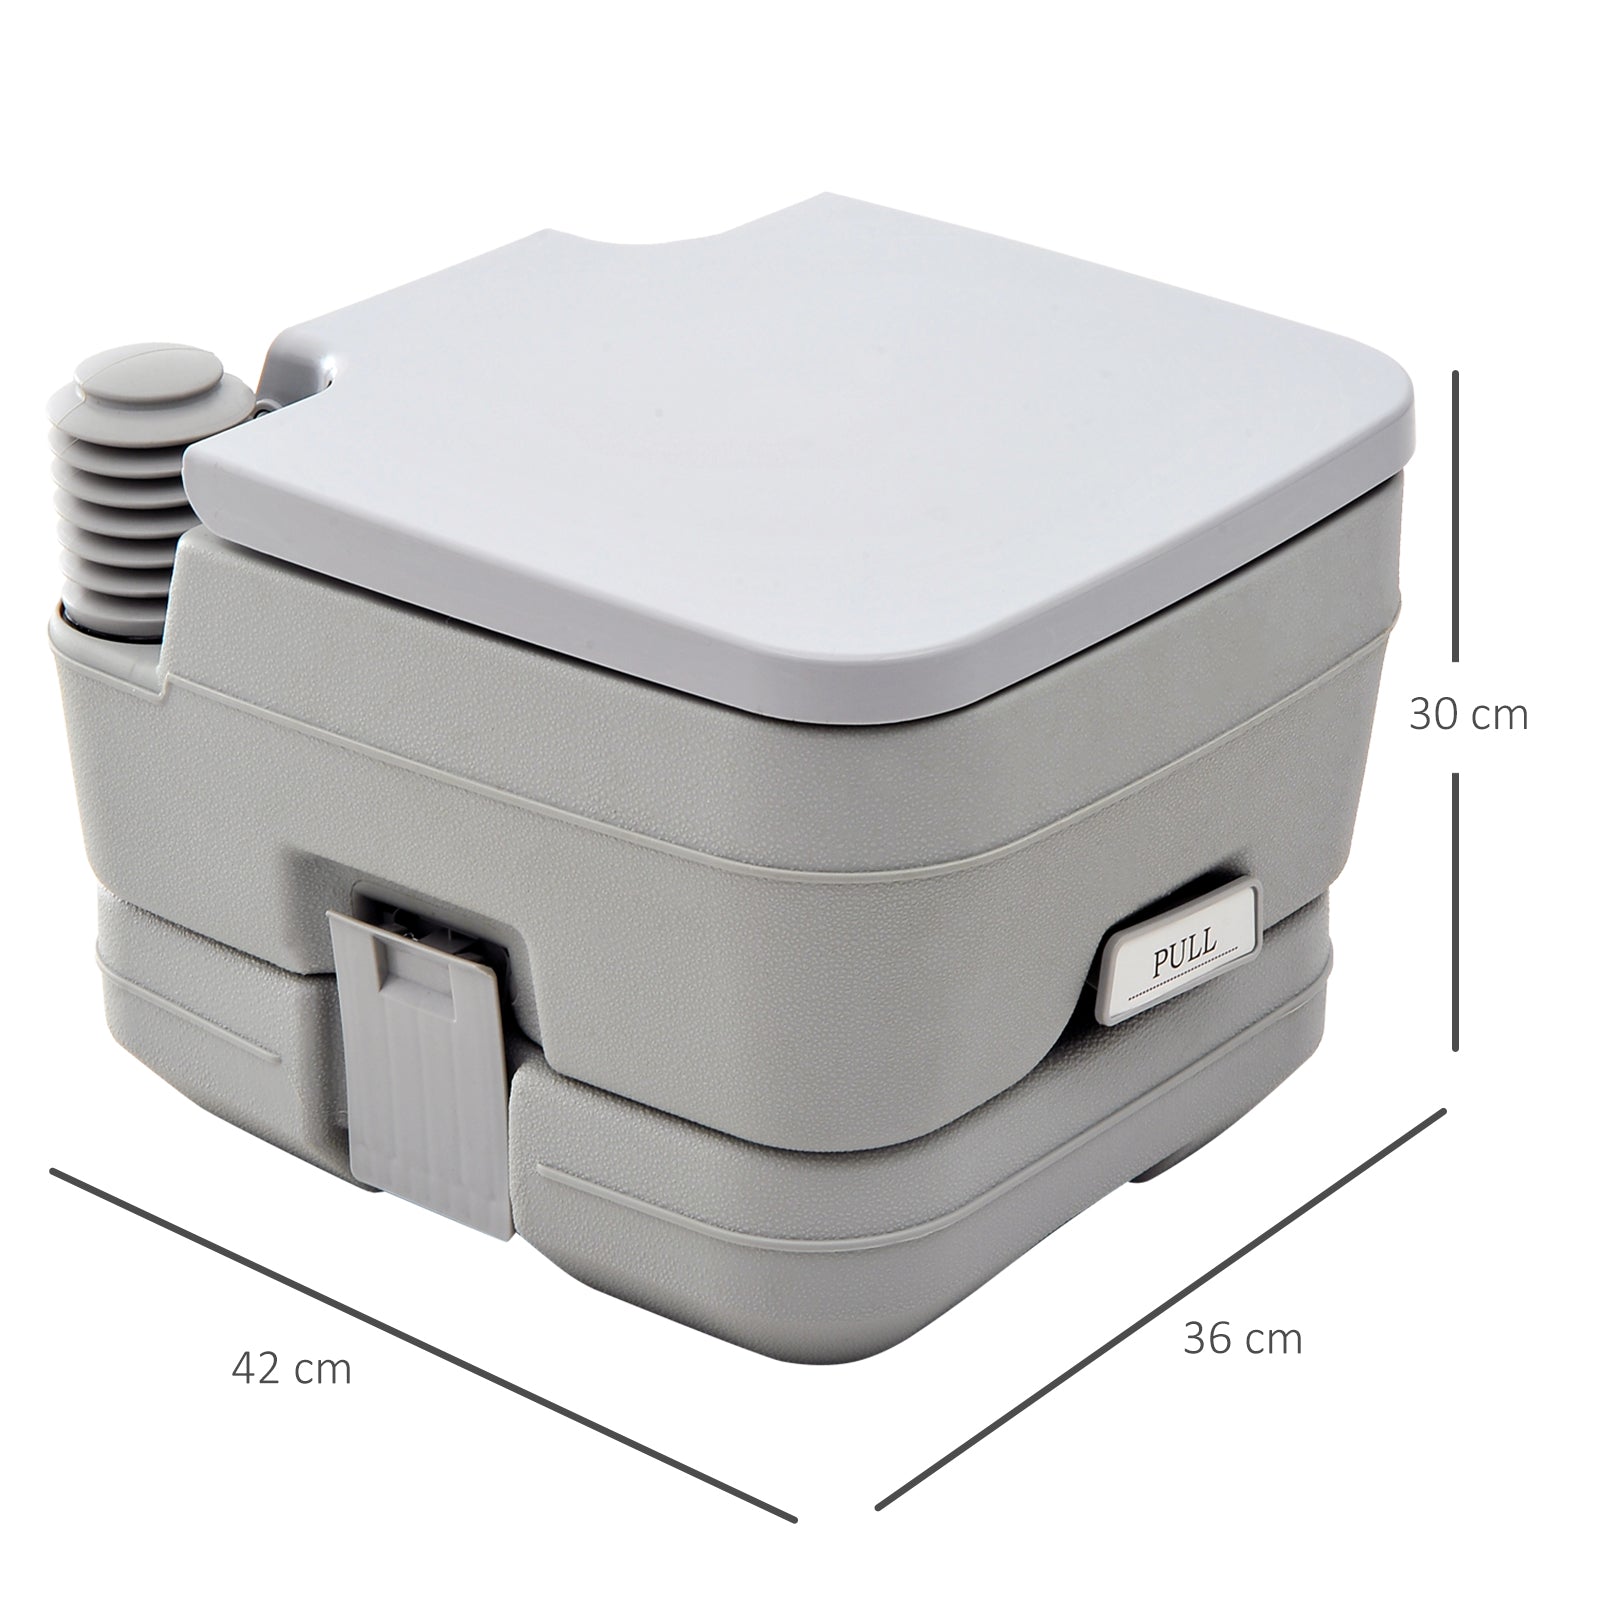 10L Portable Travel Toilet Outdoor Camping Picnic with 2 Detachable Tanks & Push-button Operation, Grey-2